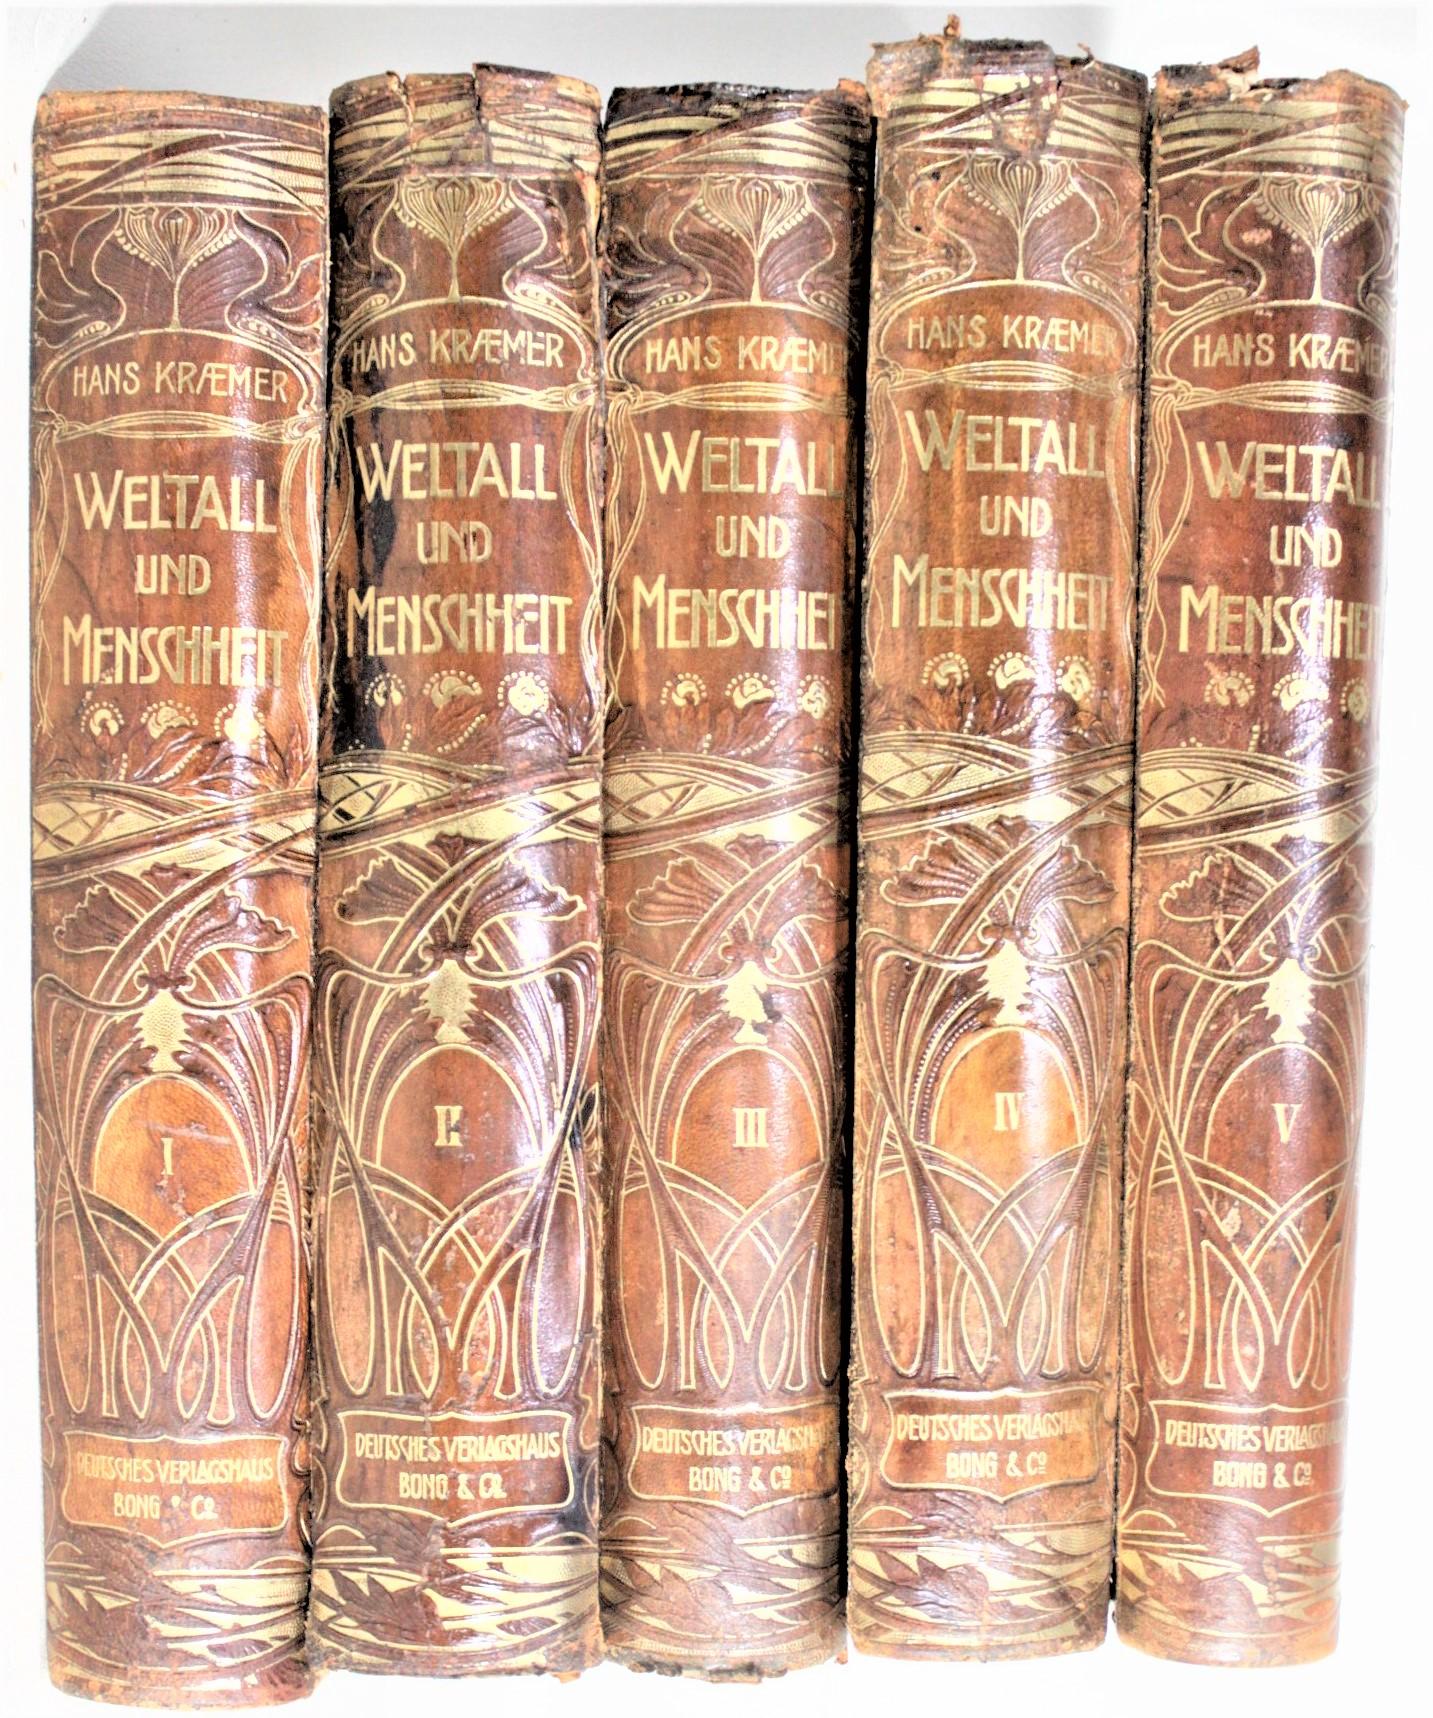 This five volume set of leather bound 1st Edition encyclopedias were done by Weltall and Menschheit of Germany in 1900 in the period Art Nouveau style. This set is completely in German, but cover broad areas of scientific inquiry for the period and